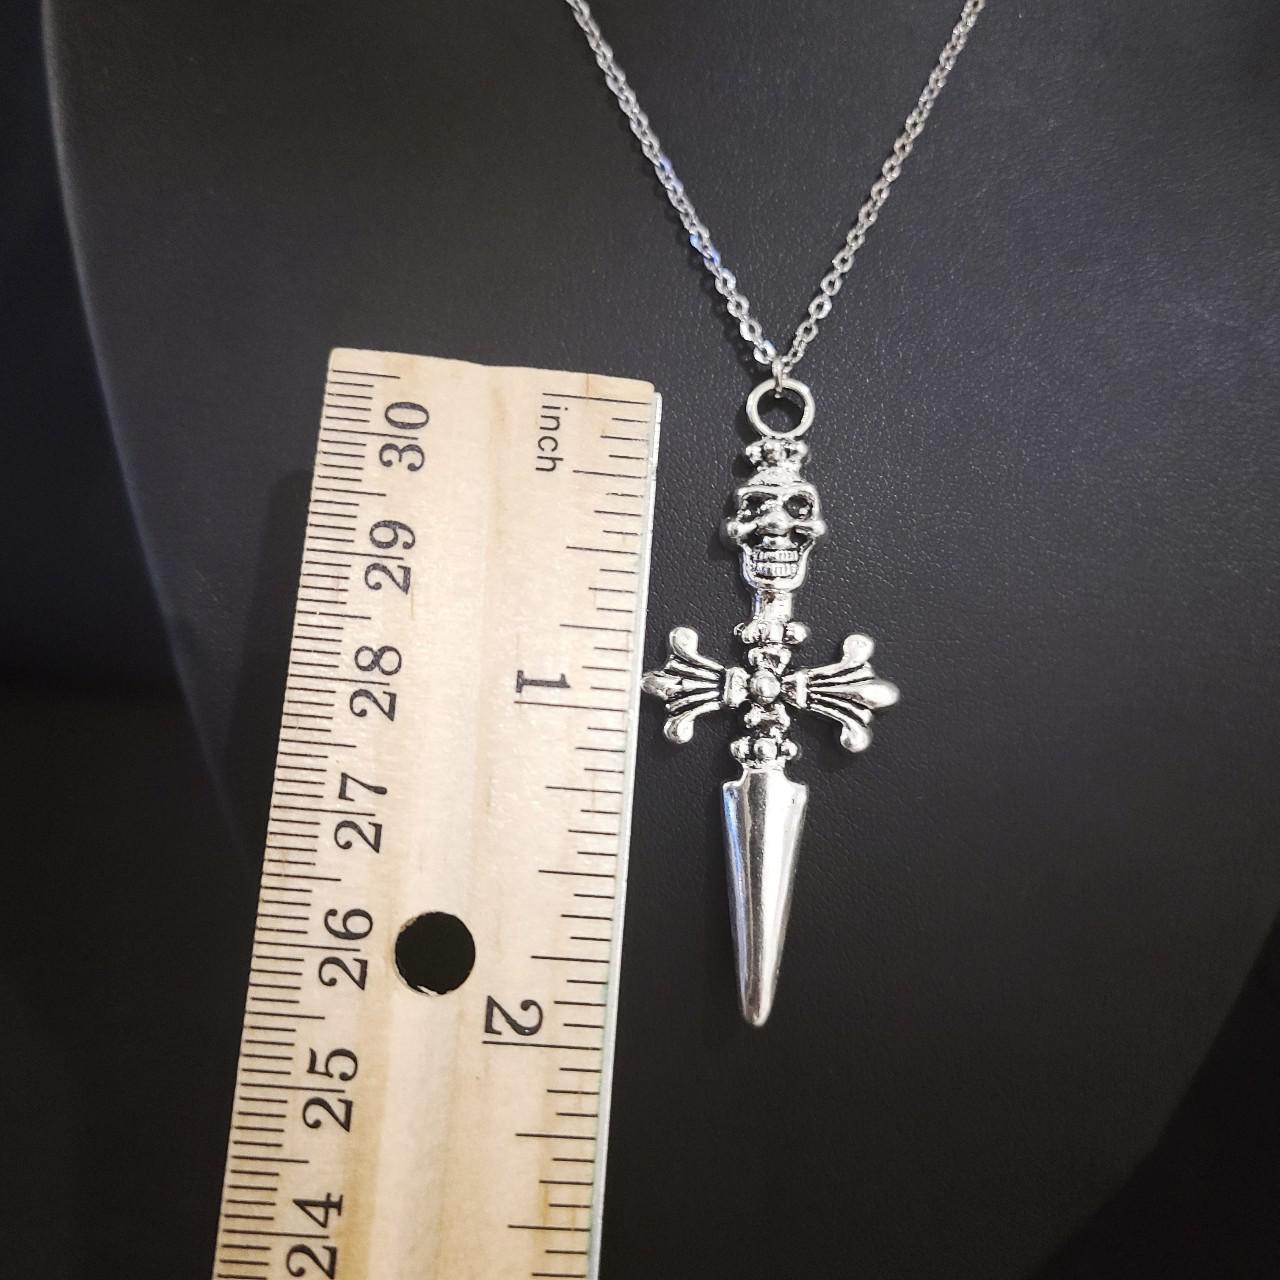 Product Image 3 - 18" Skull Sword Necklace 001

Stainless